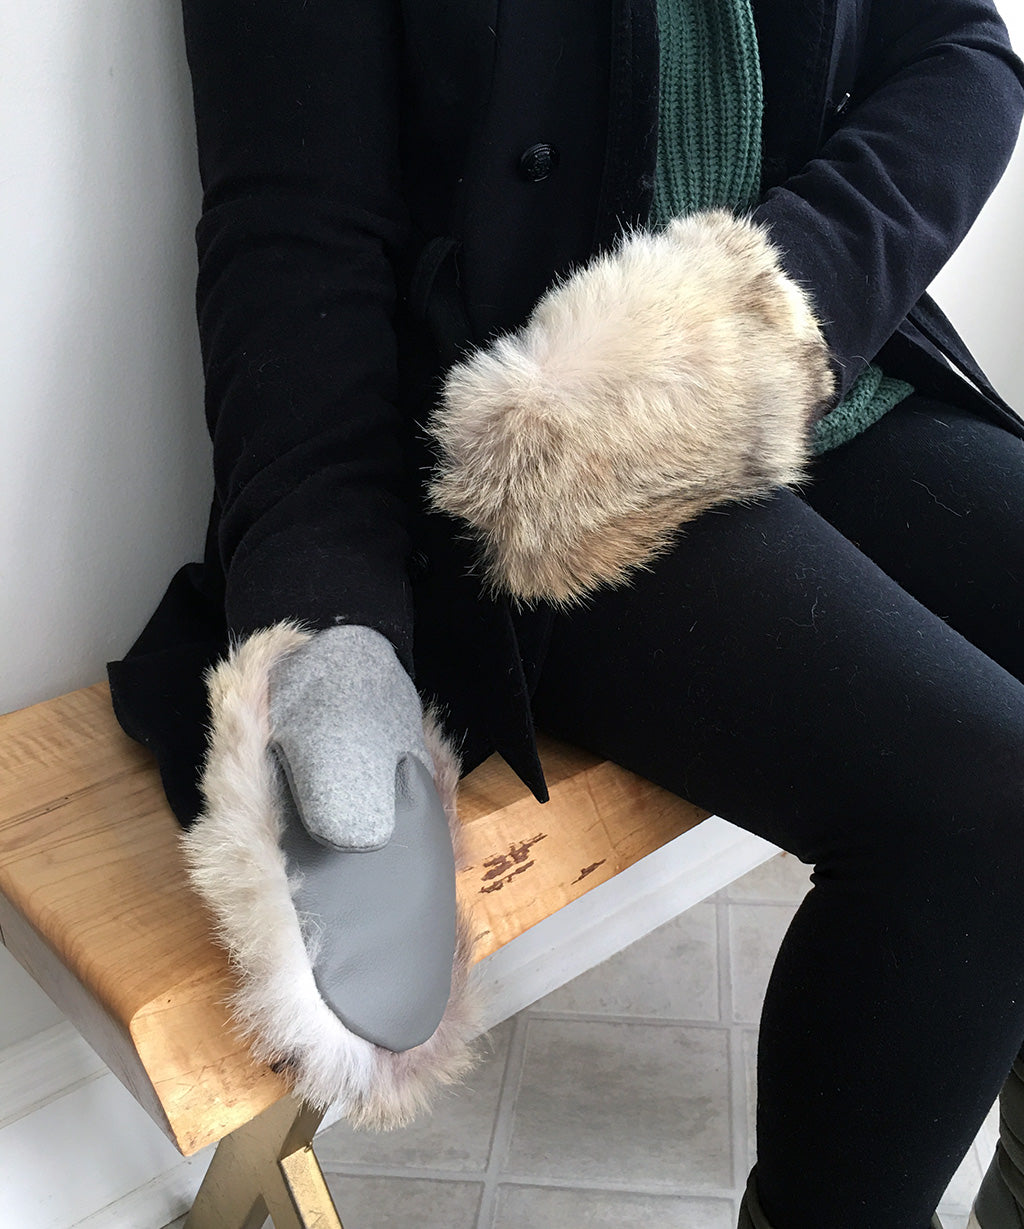 Women's Large / Men's Small Eco-Friendly Real Fur Mittens - Coyote Fur